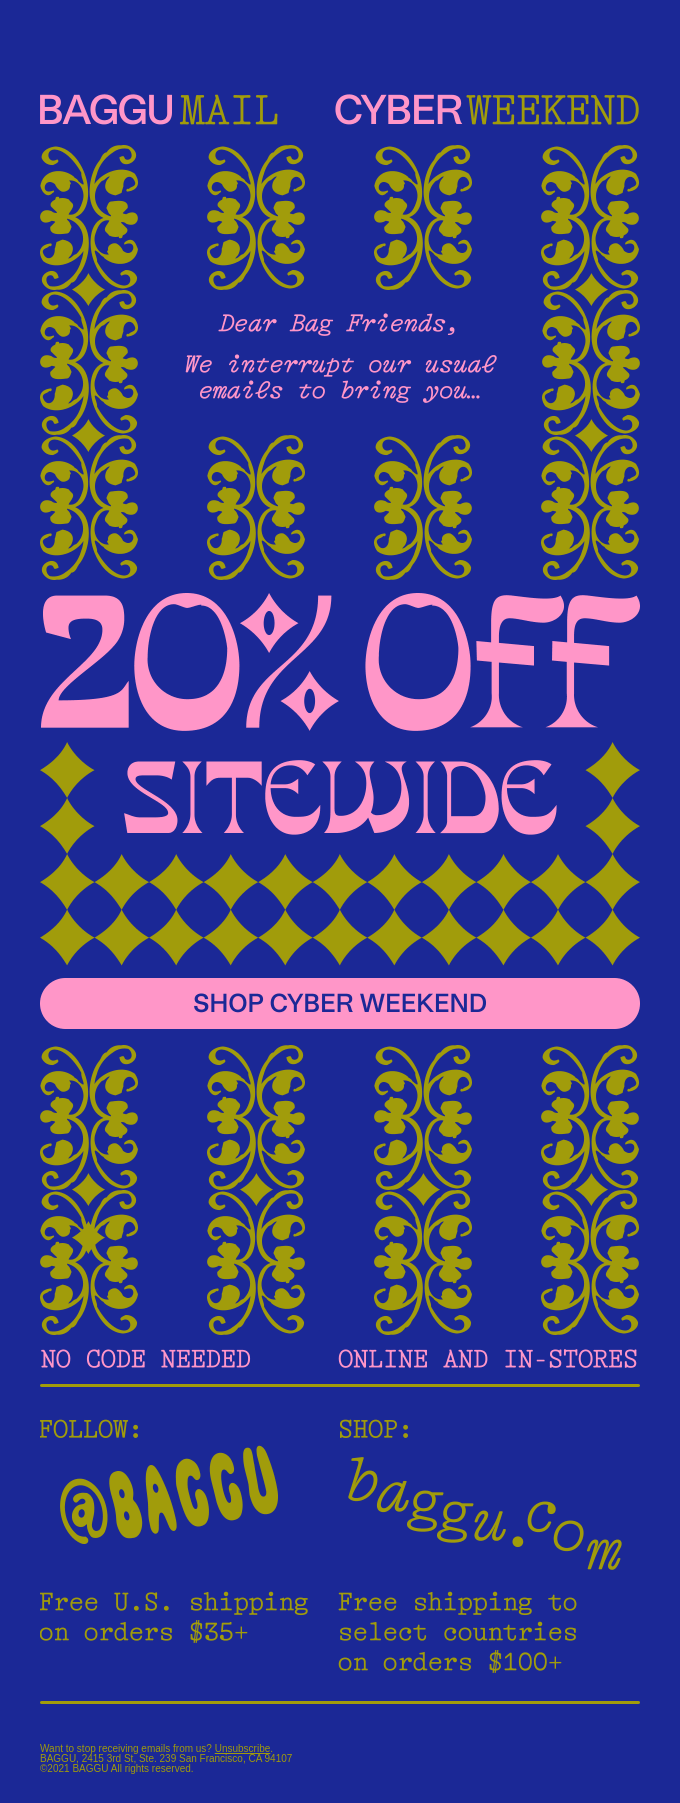 Our Cyber Weekend Sale Continues